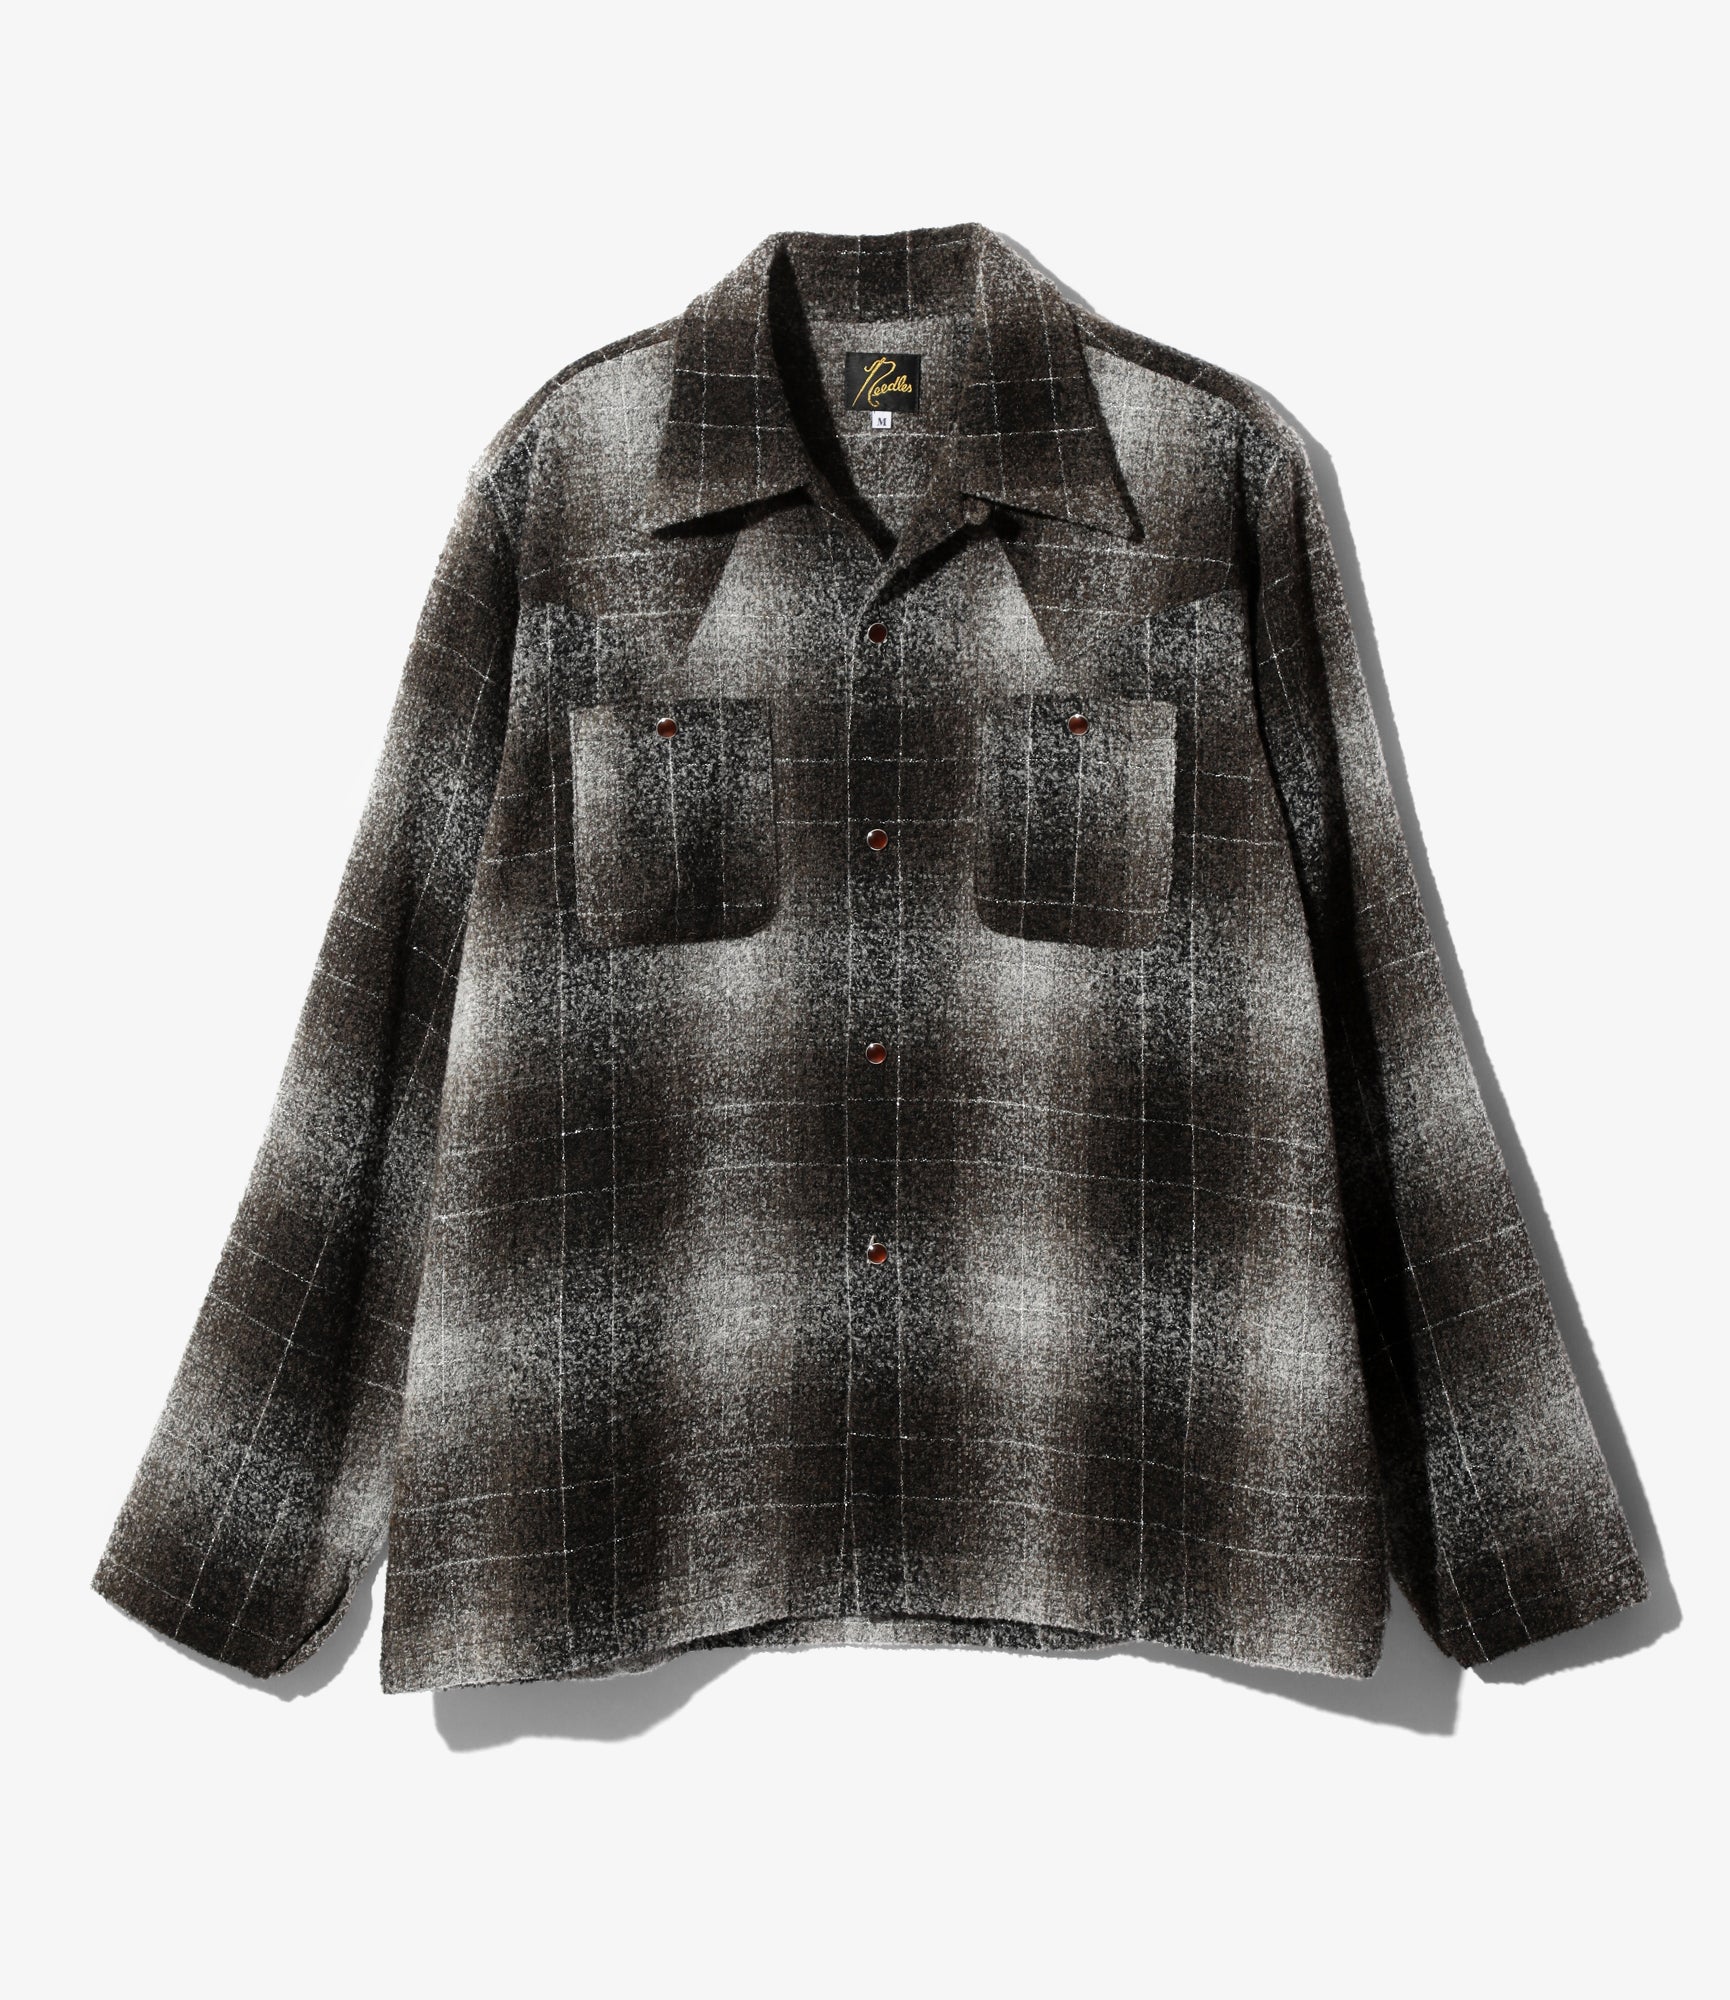 Needles Cowboy One-Up Shirt - W/N/PE Ombre Plaid - Brown